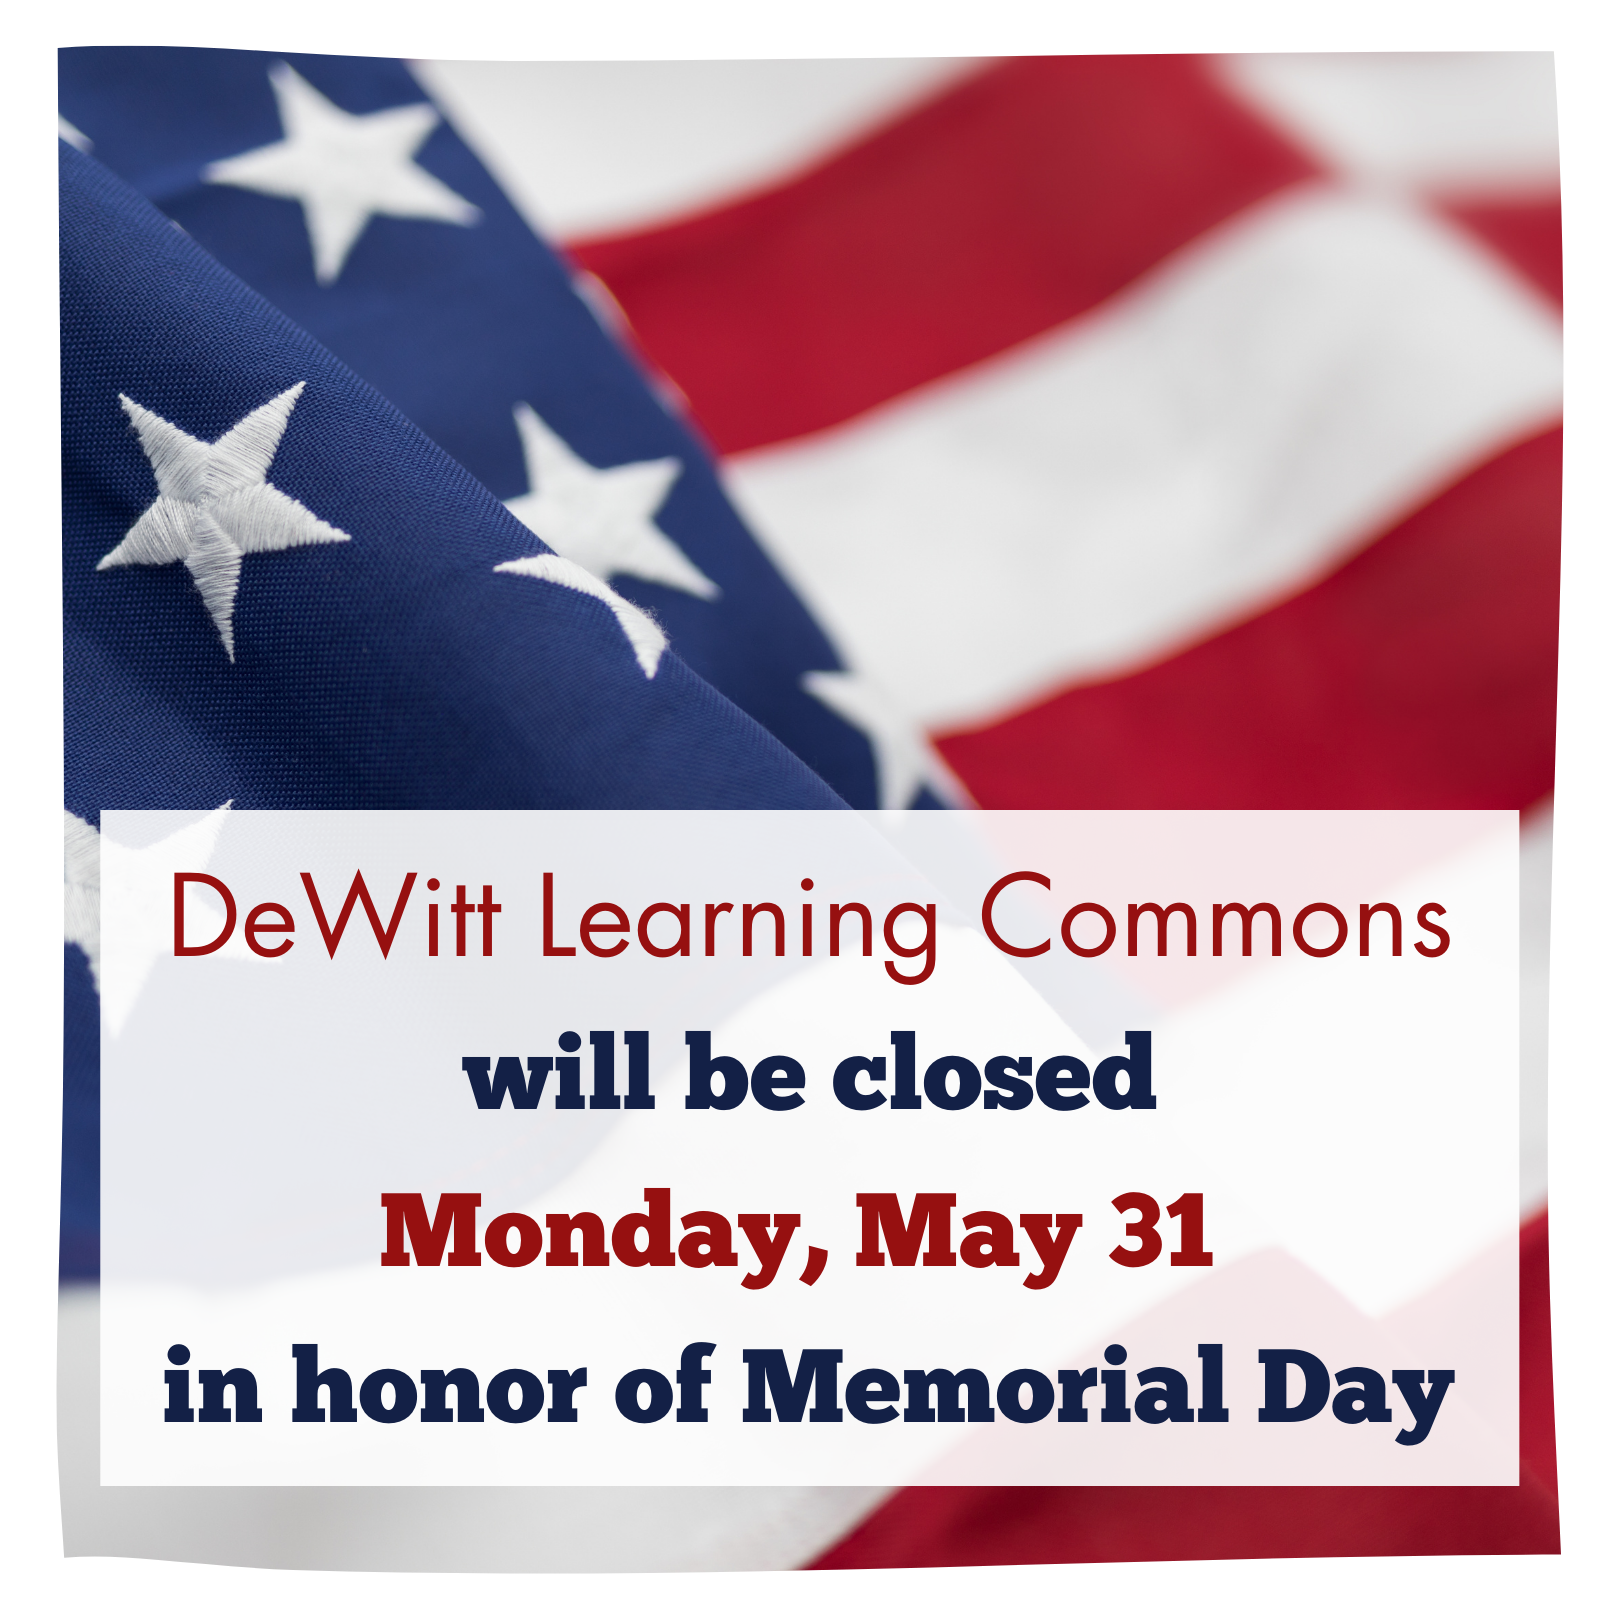 DeWitt Learning Commons will be closed Monday, May 31  in honor of Memorial Day